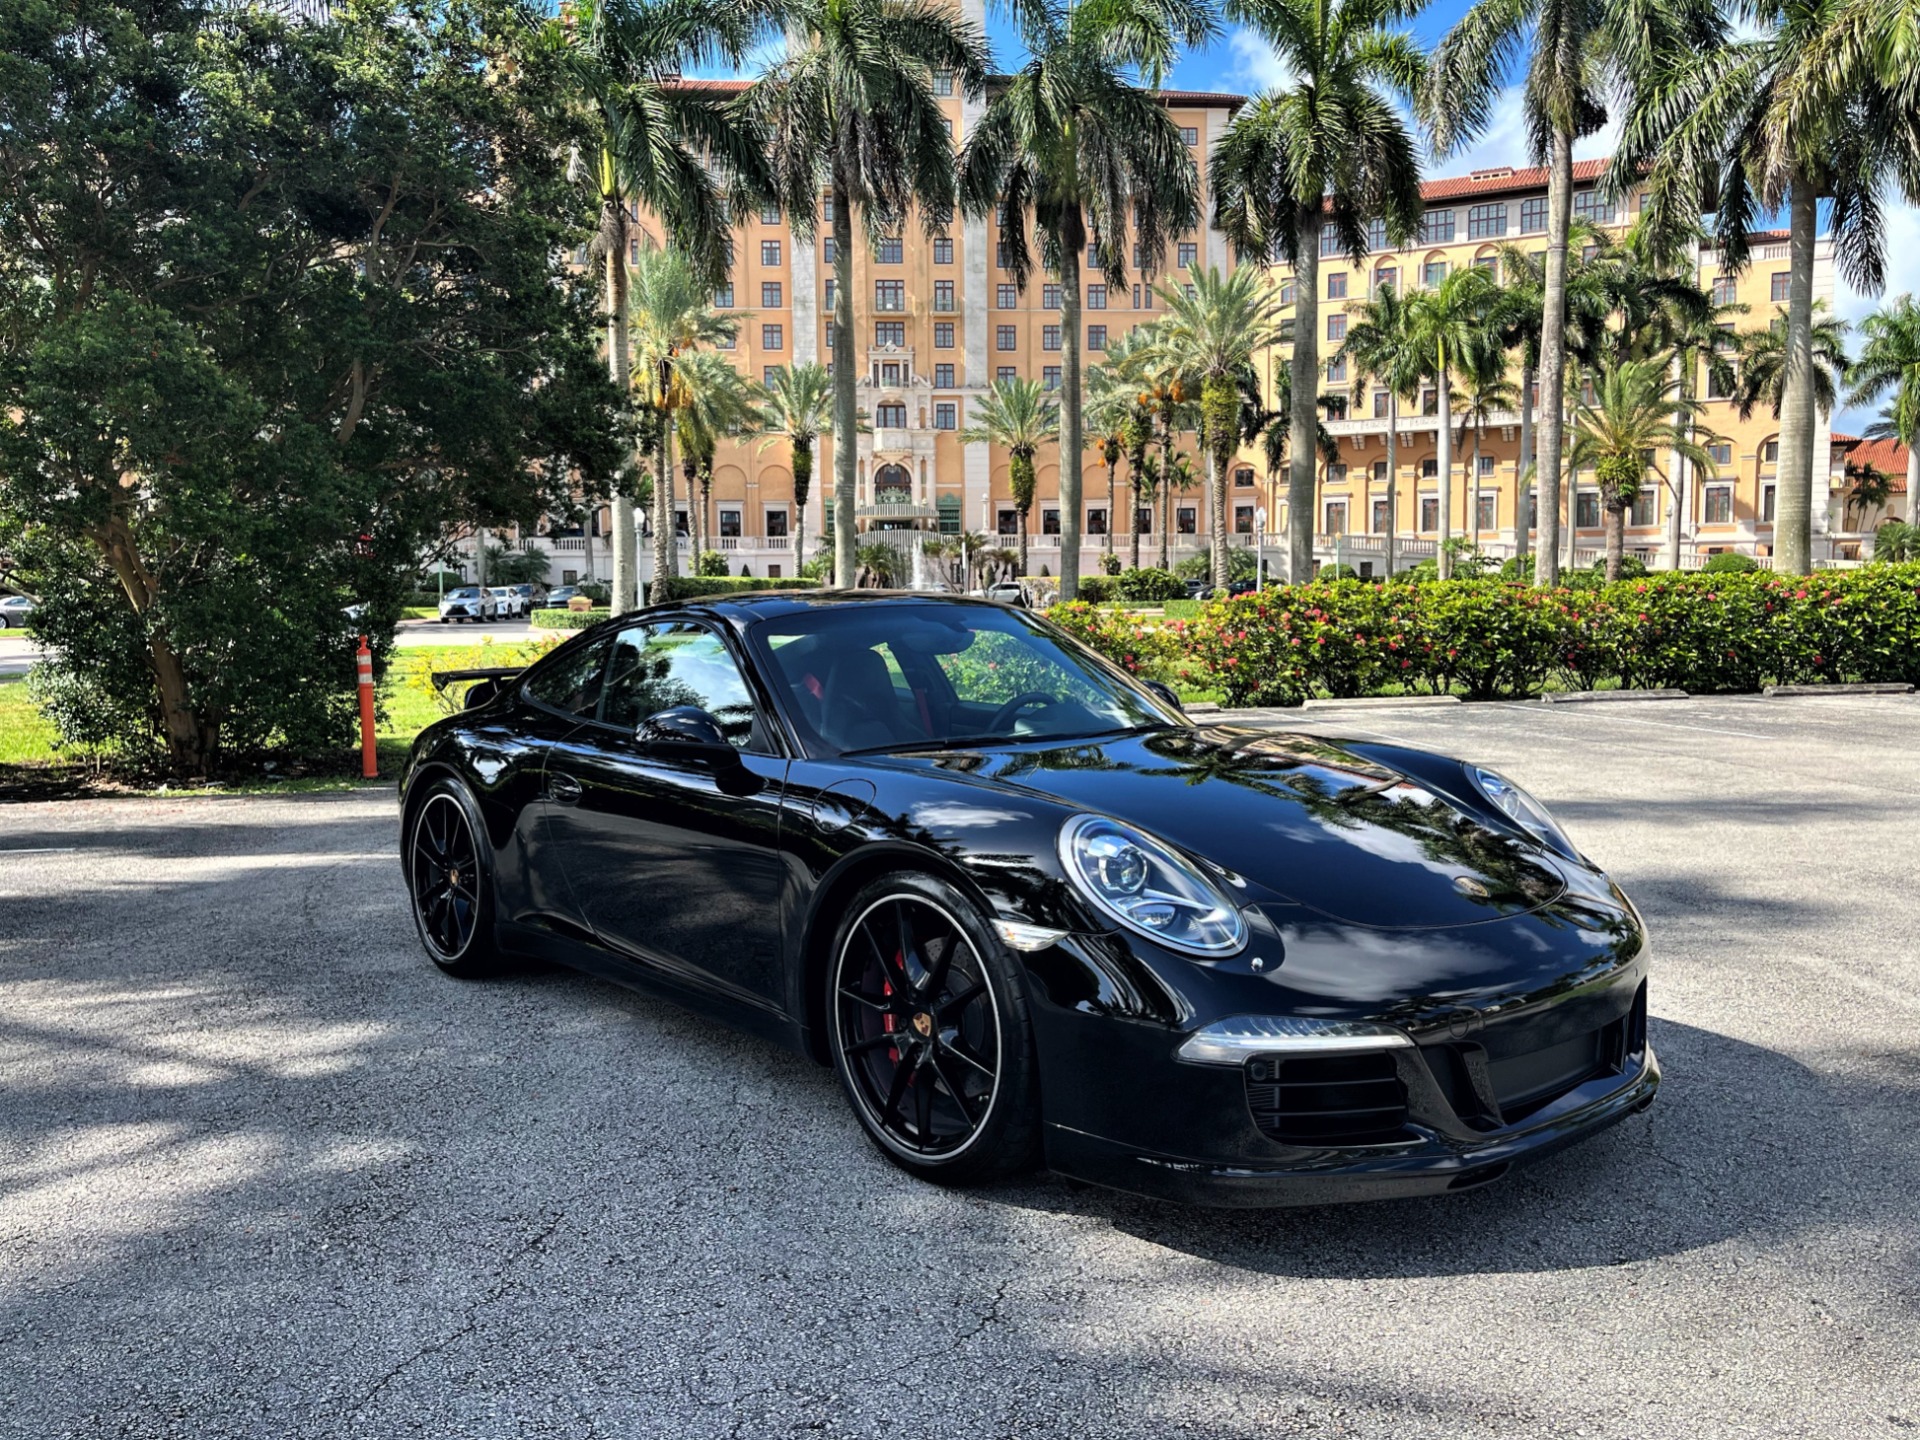 Used 2013 Porsche 911 Carrera S for sale Sold at The Gables Sports Cars in Miami FL 33146 4